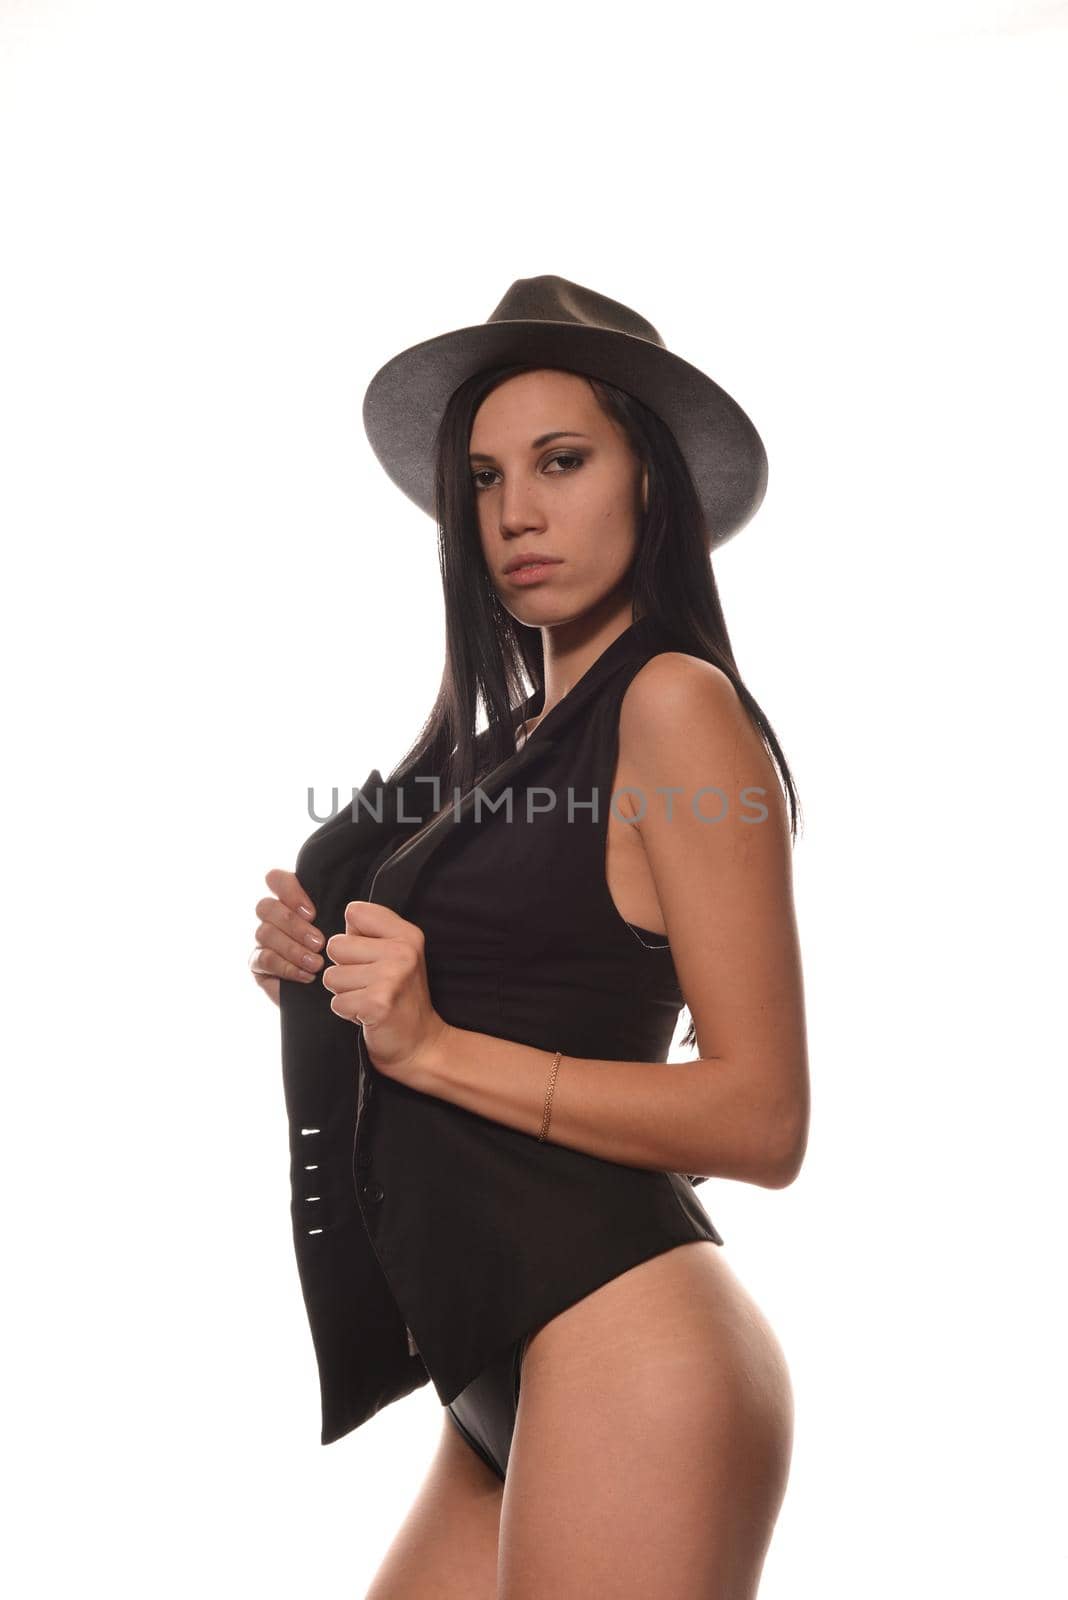 woman in black lingerie and a gray hat by zartarn